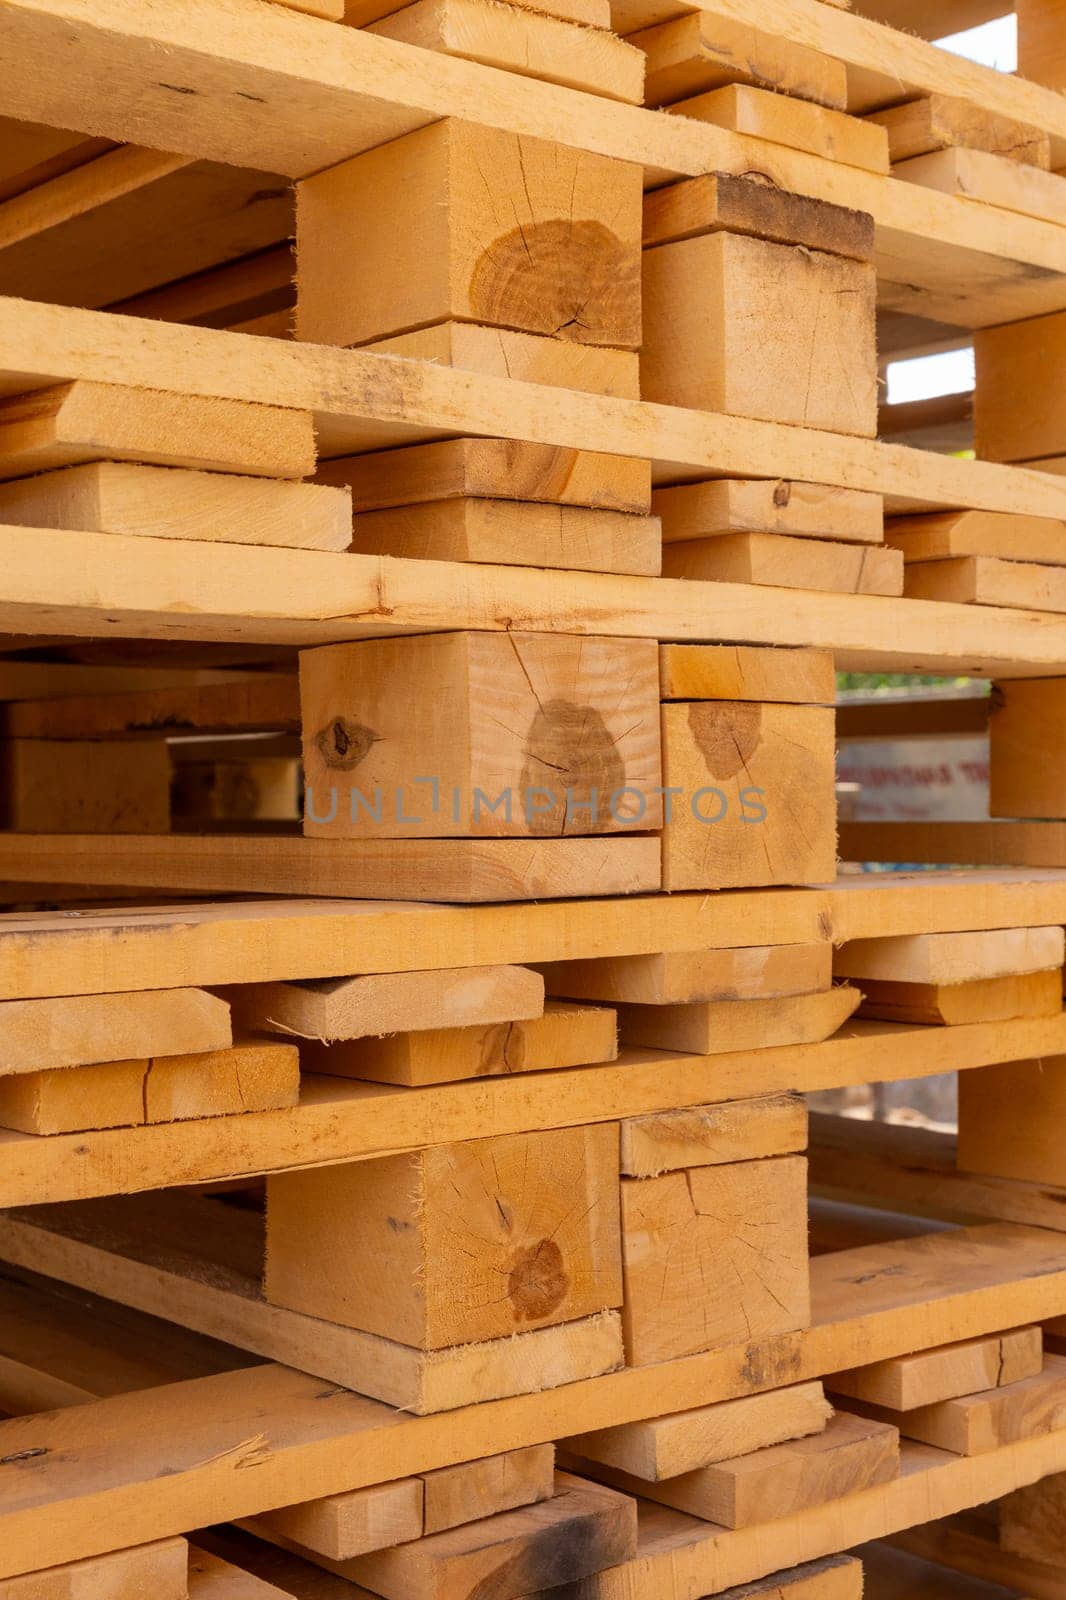 Piles of stacked natural wooden shipping pallets. by BY-_-BY